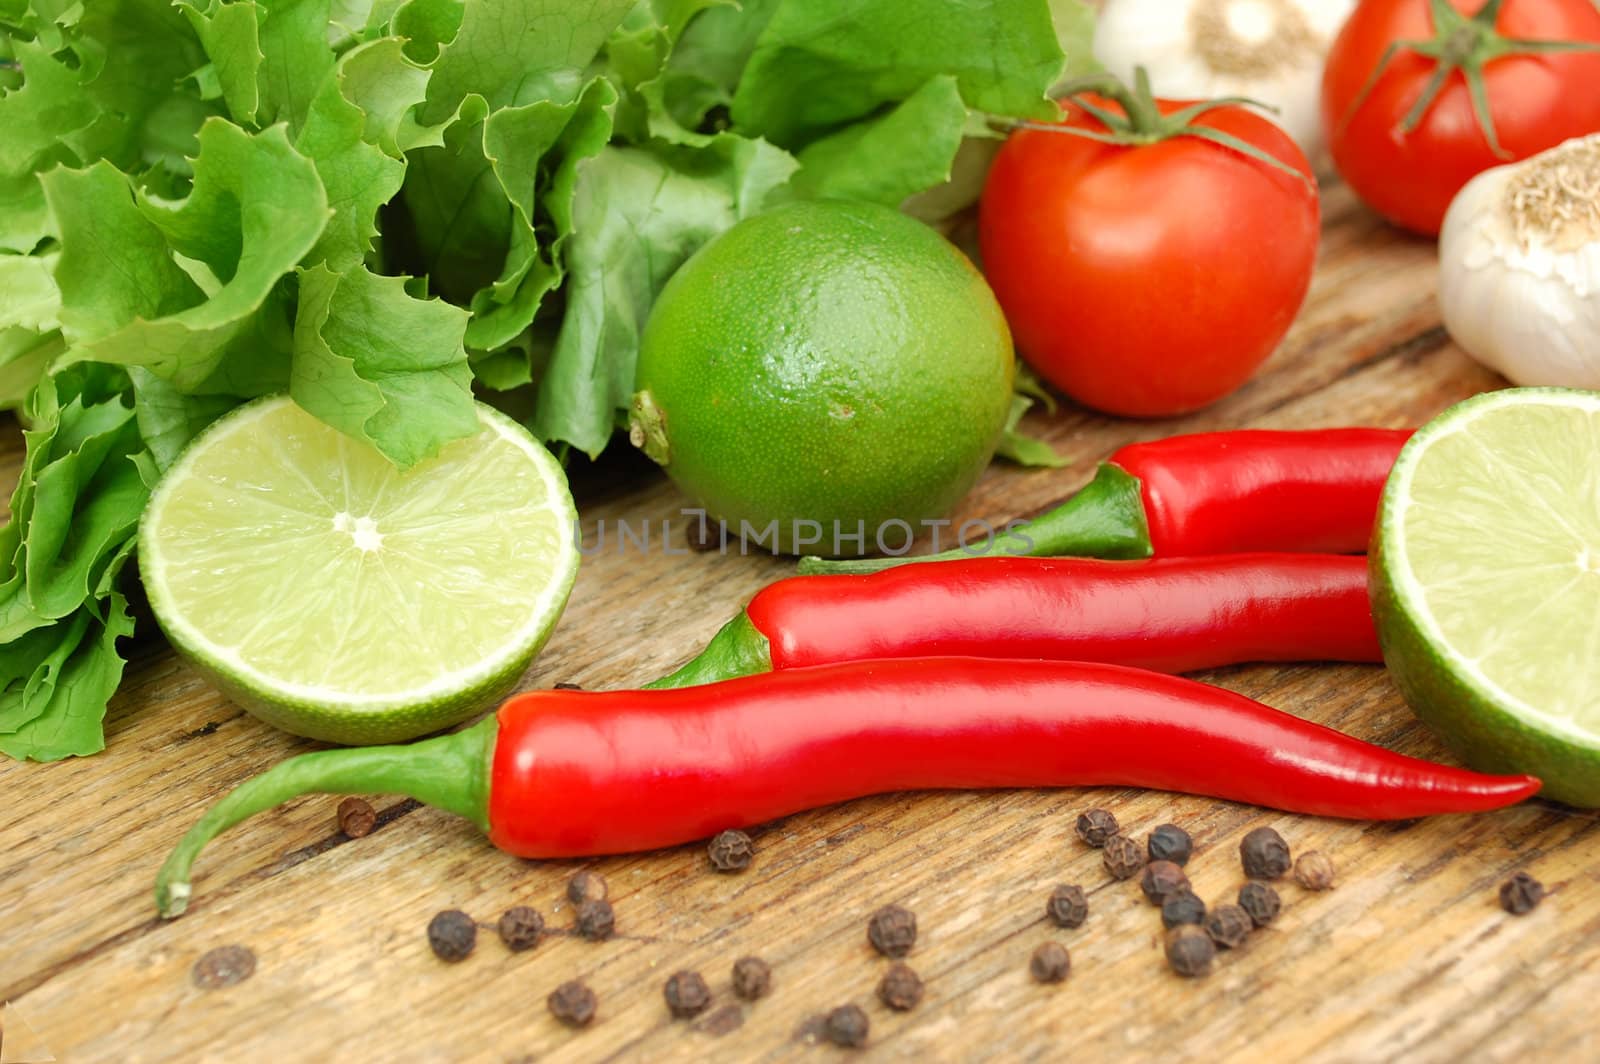 Ingredients laid out for preparing a salad